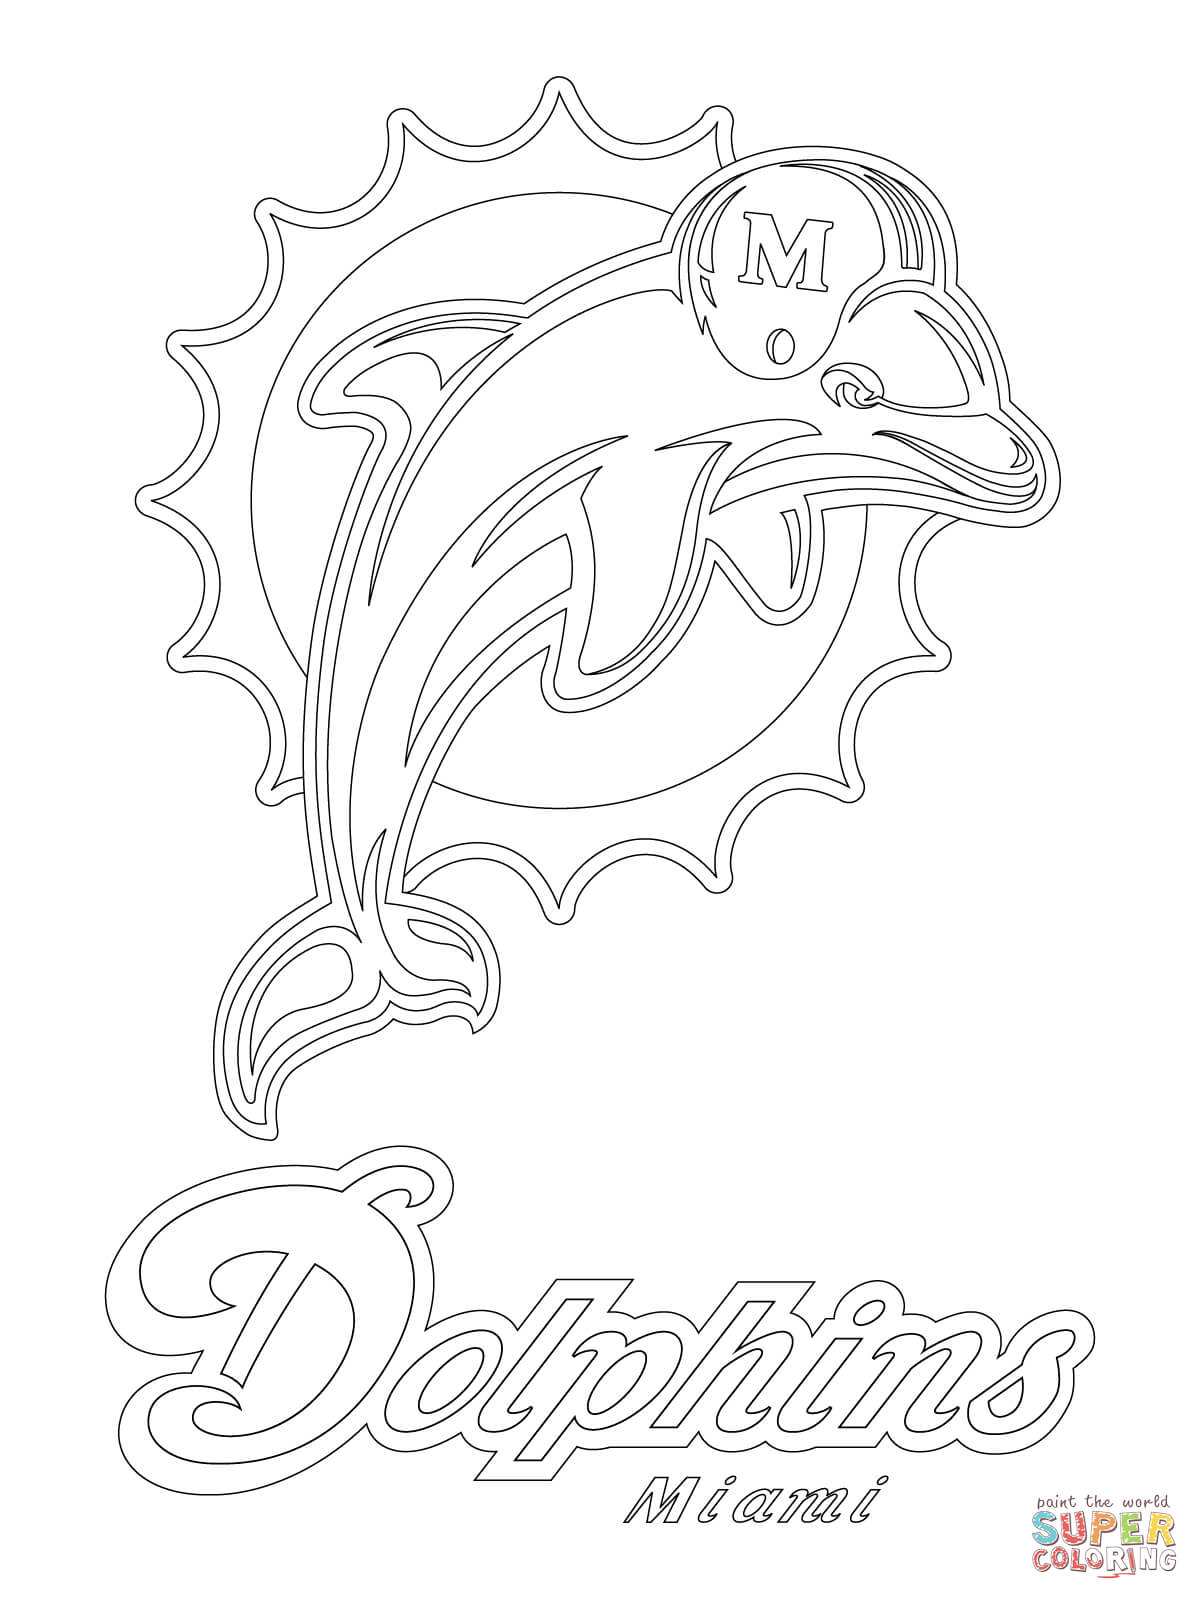 Miami Dolphins Logo Coloring Page | Free Printable ...